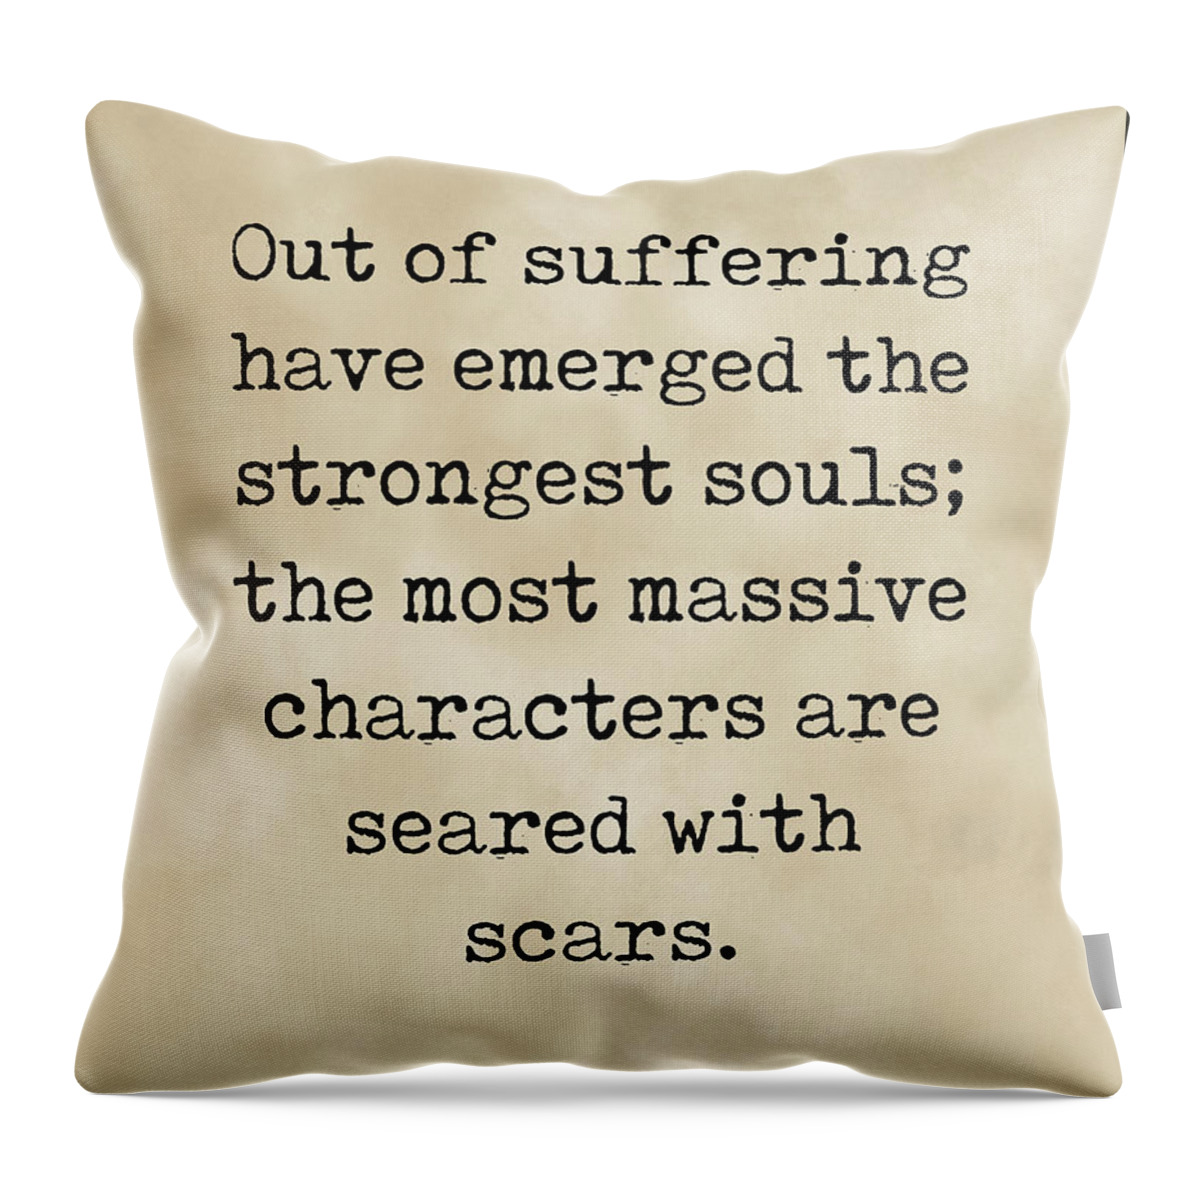 Out Of Suffering Emerged The Strongest Souls Throw Pillow featuring the digital art Out of suffering emerged the strongest souls, Kahlil Gibran Quote, Literary Typewriter Print Vintage by Studio Grafiikka